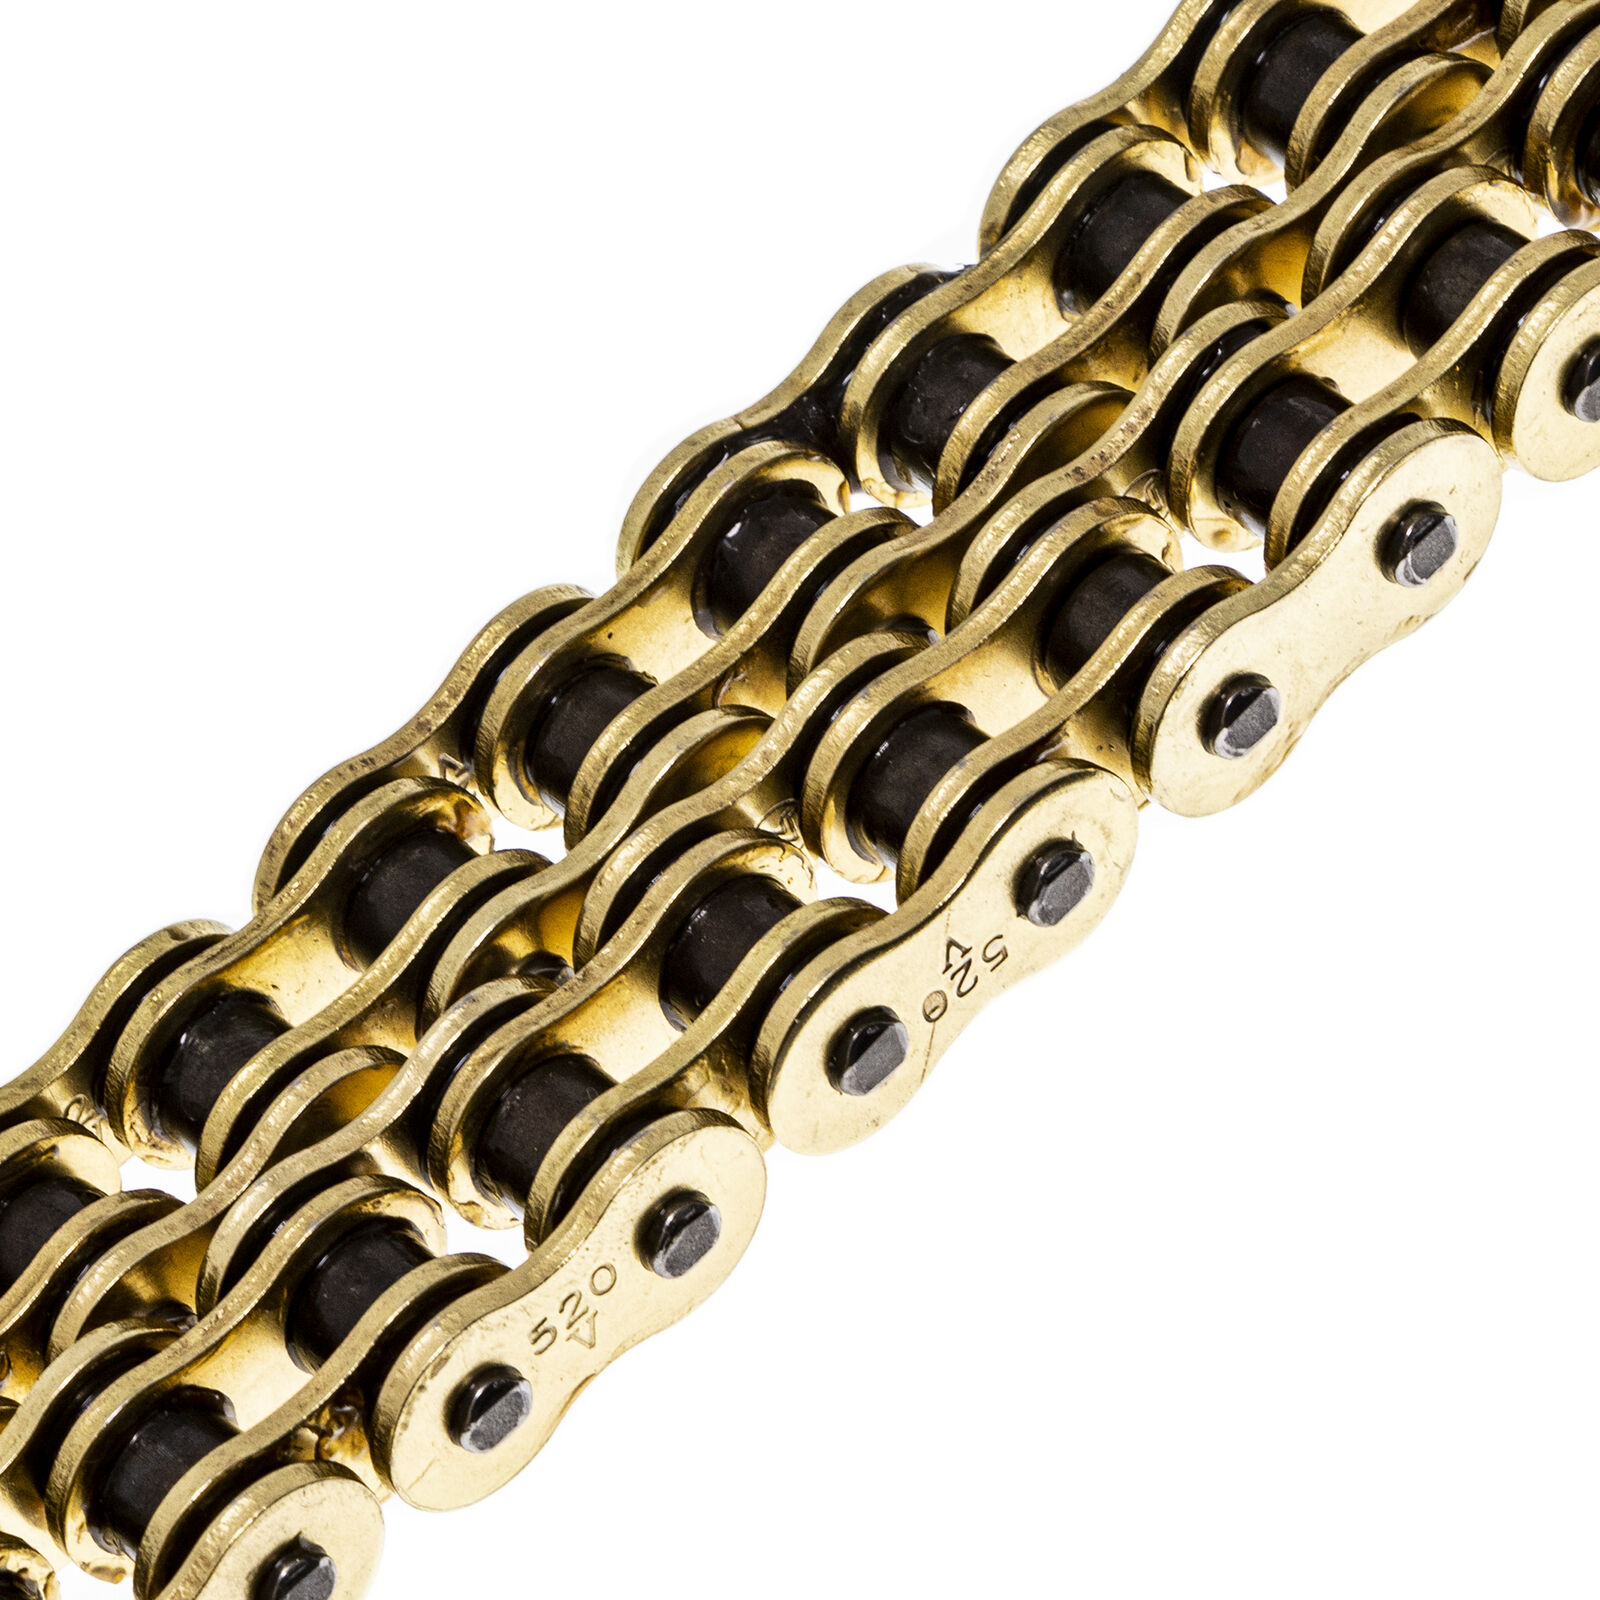 NICHE Gold 520 X-Ring Chain 116 Links With Connecting Master Link Motorcycle